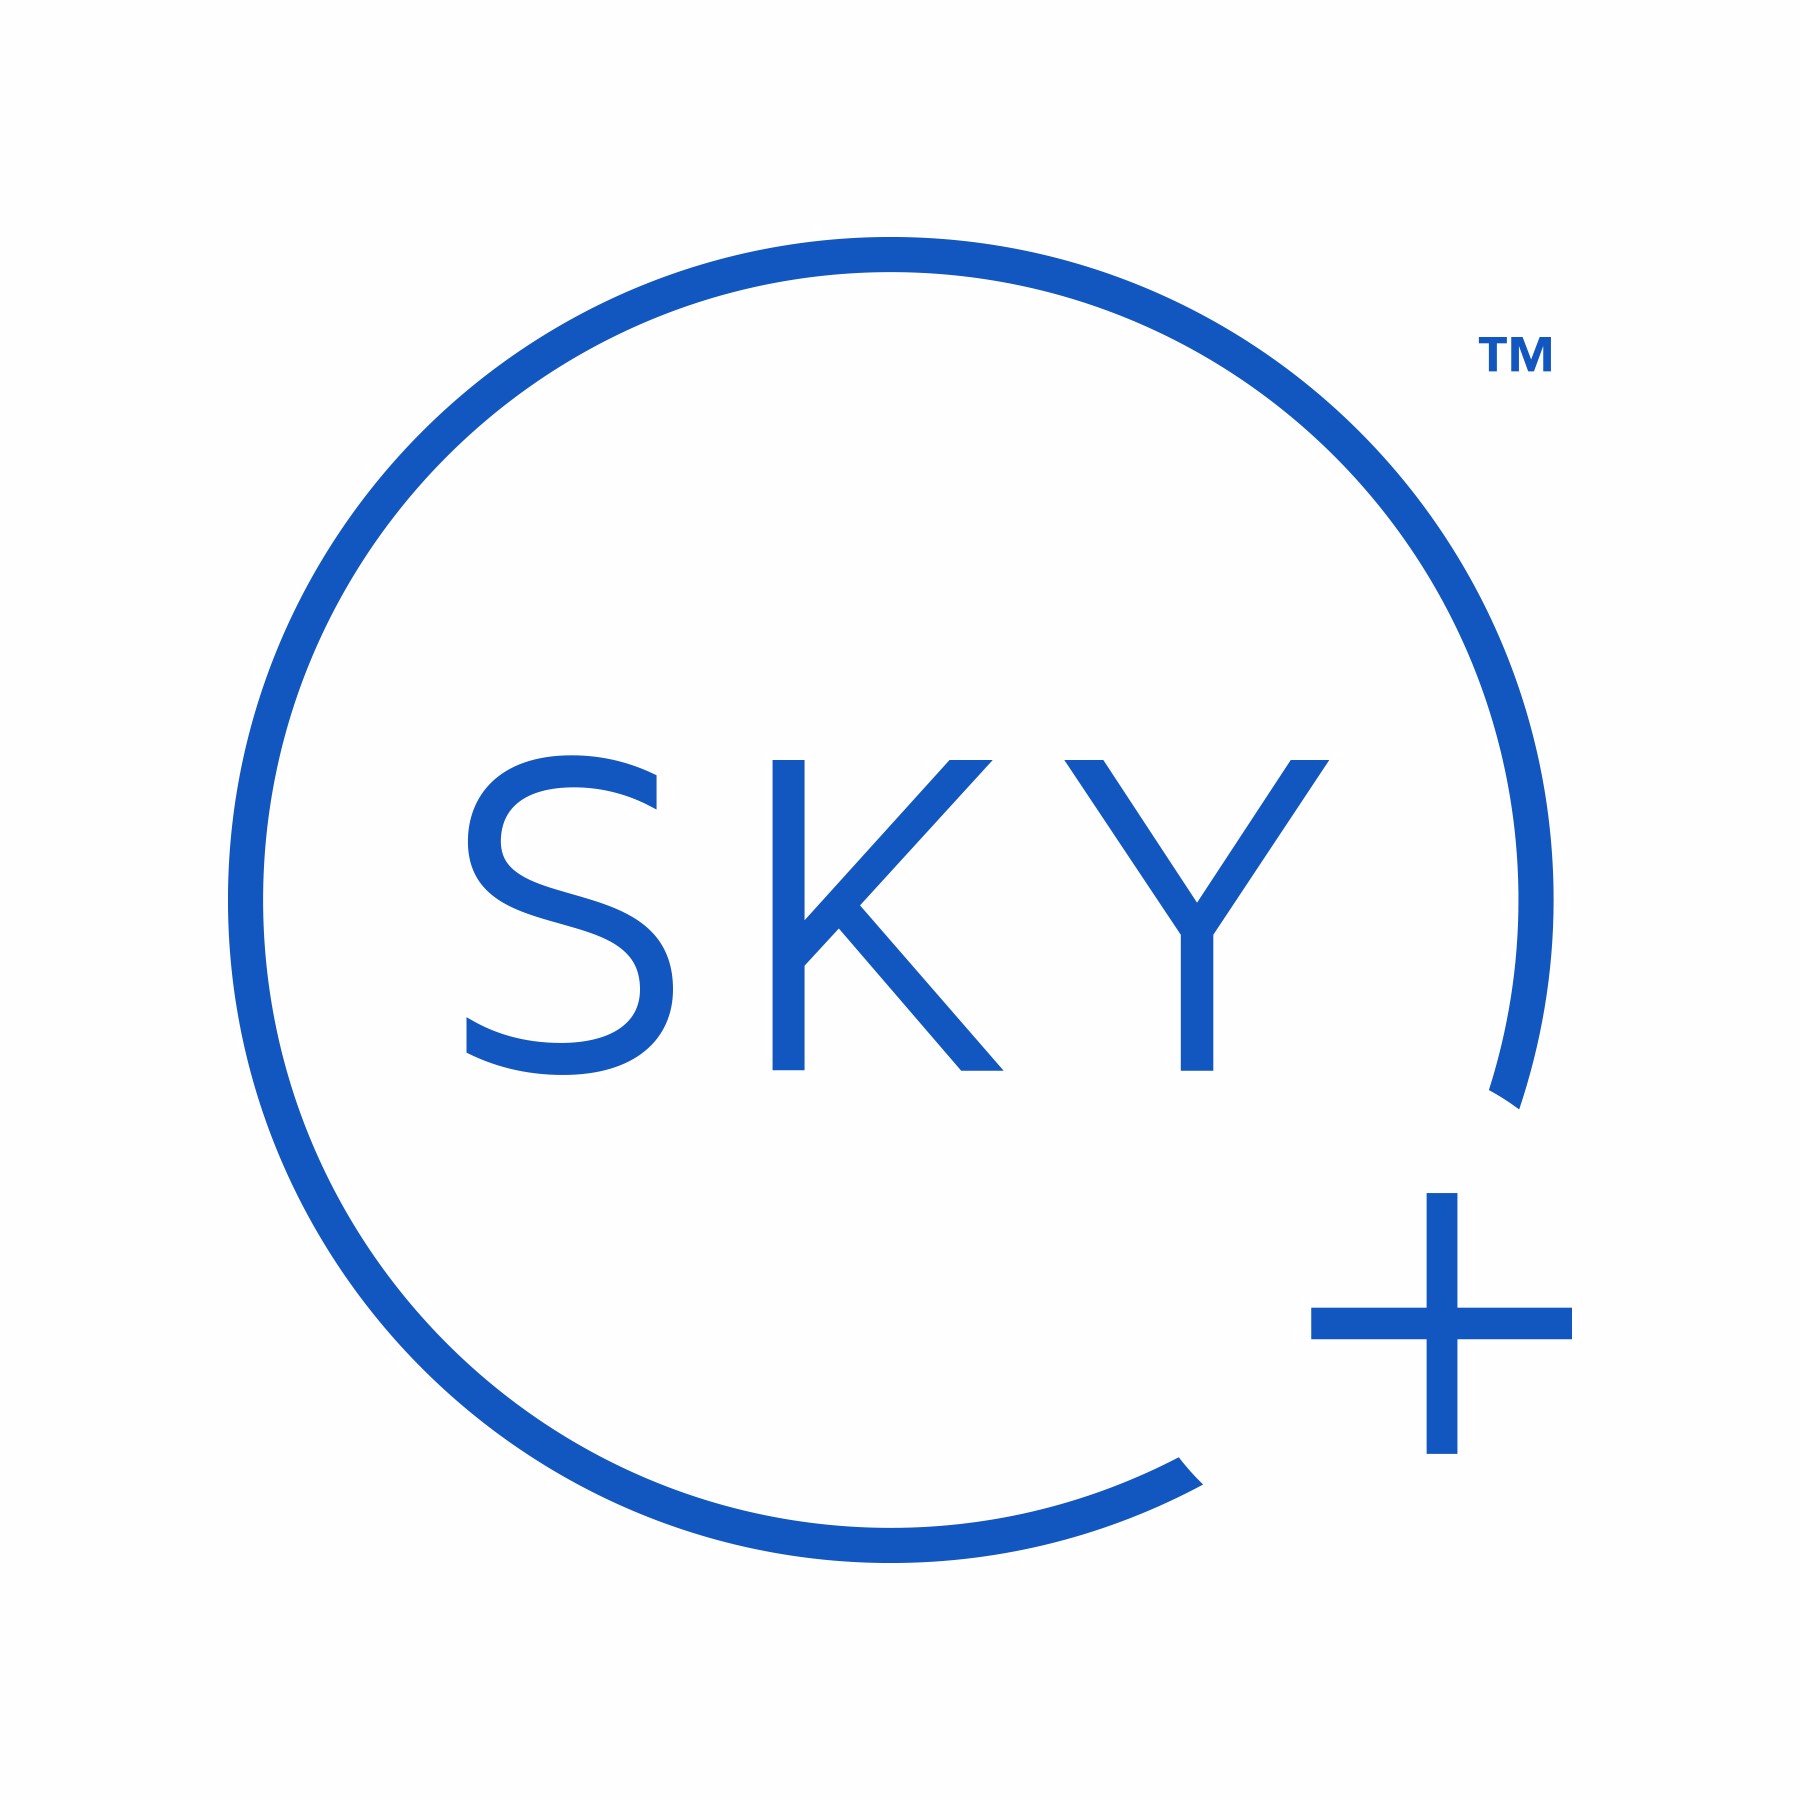 Sky Nutritionals is a Canadian nutritional supplement company that only sells clinically proven, pure, efficacious products. Find us on https://t.co/5HVkioEhlD